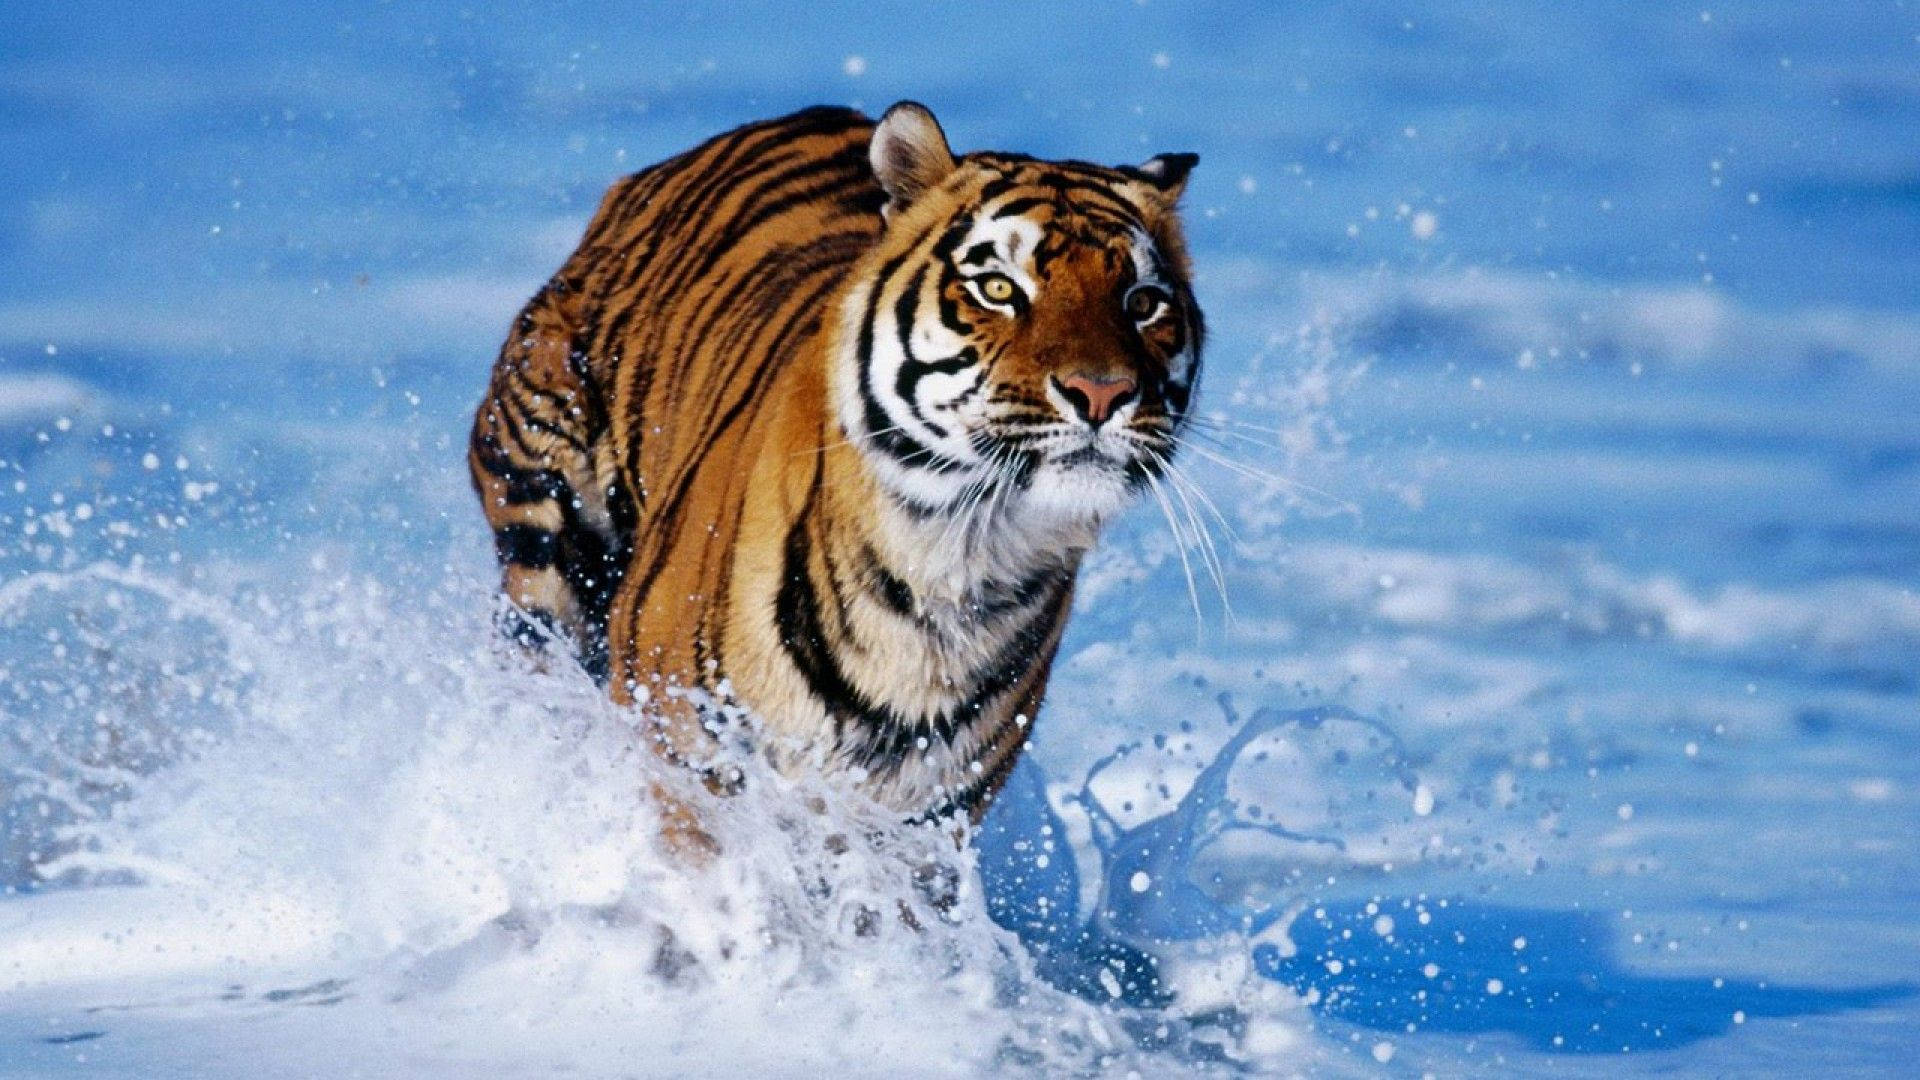 Free Tiger Wallpaper Downloads, [500+] Tiger Wallpapers for FREE |  